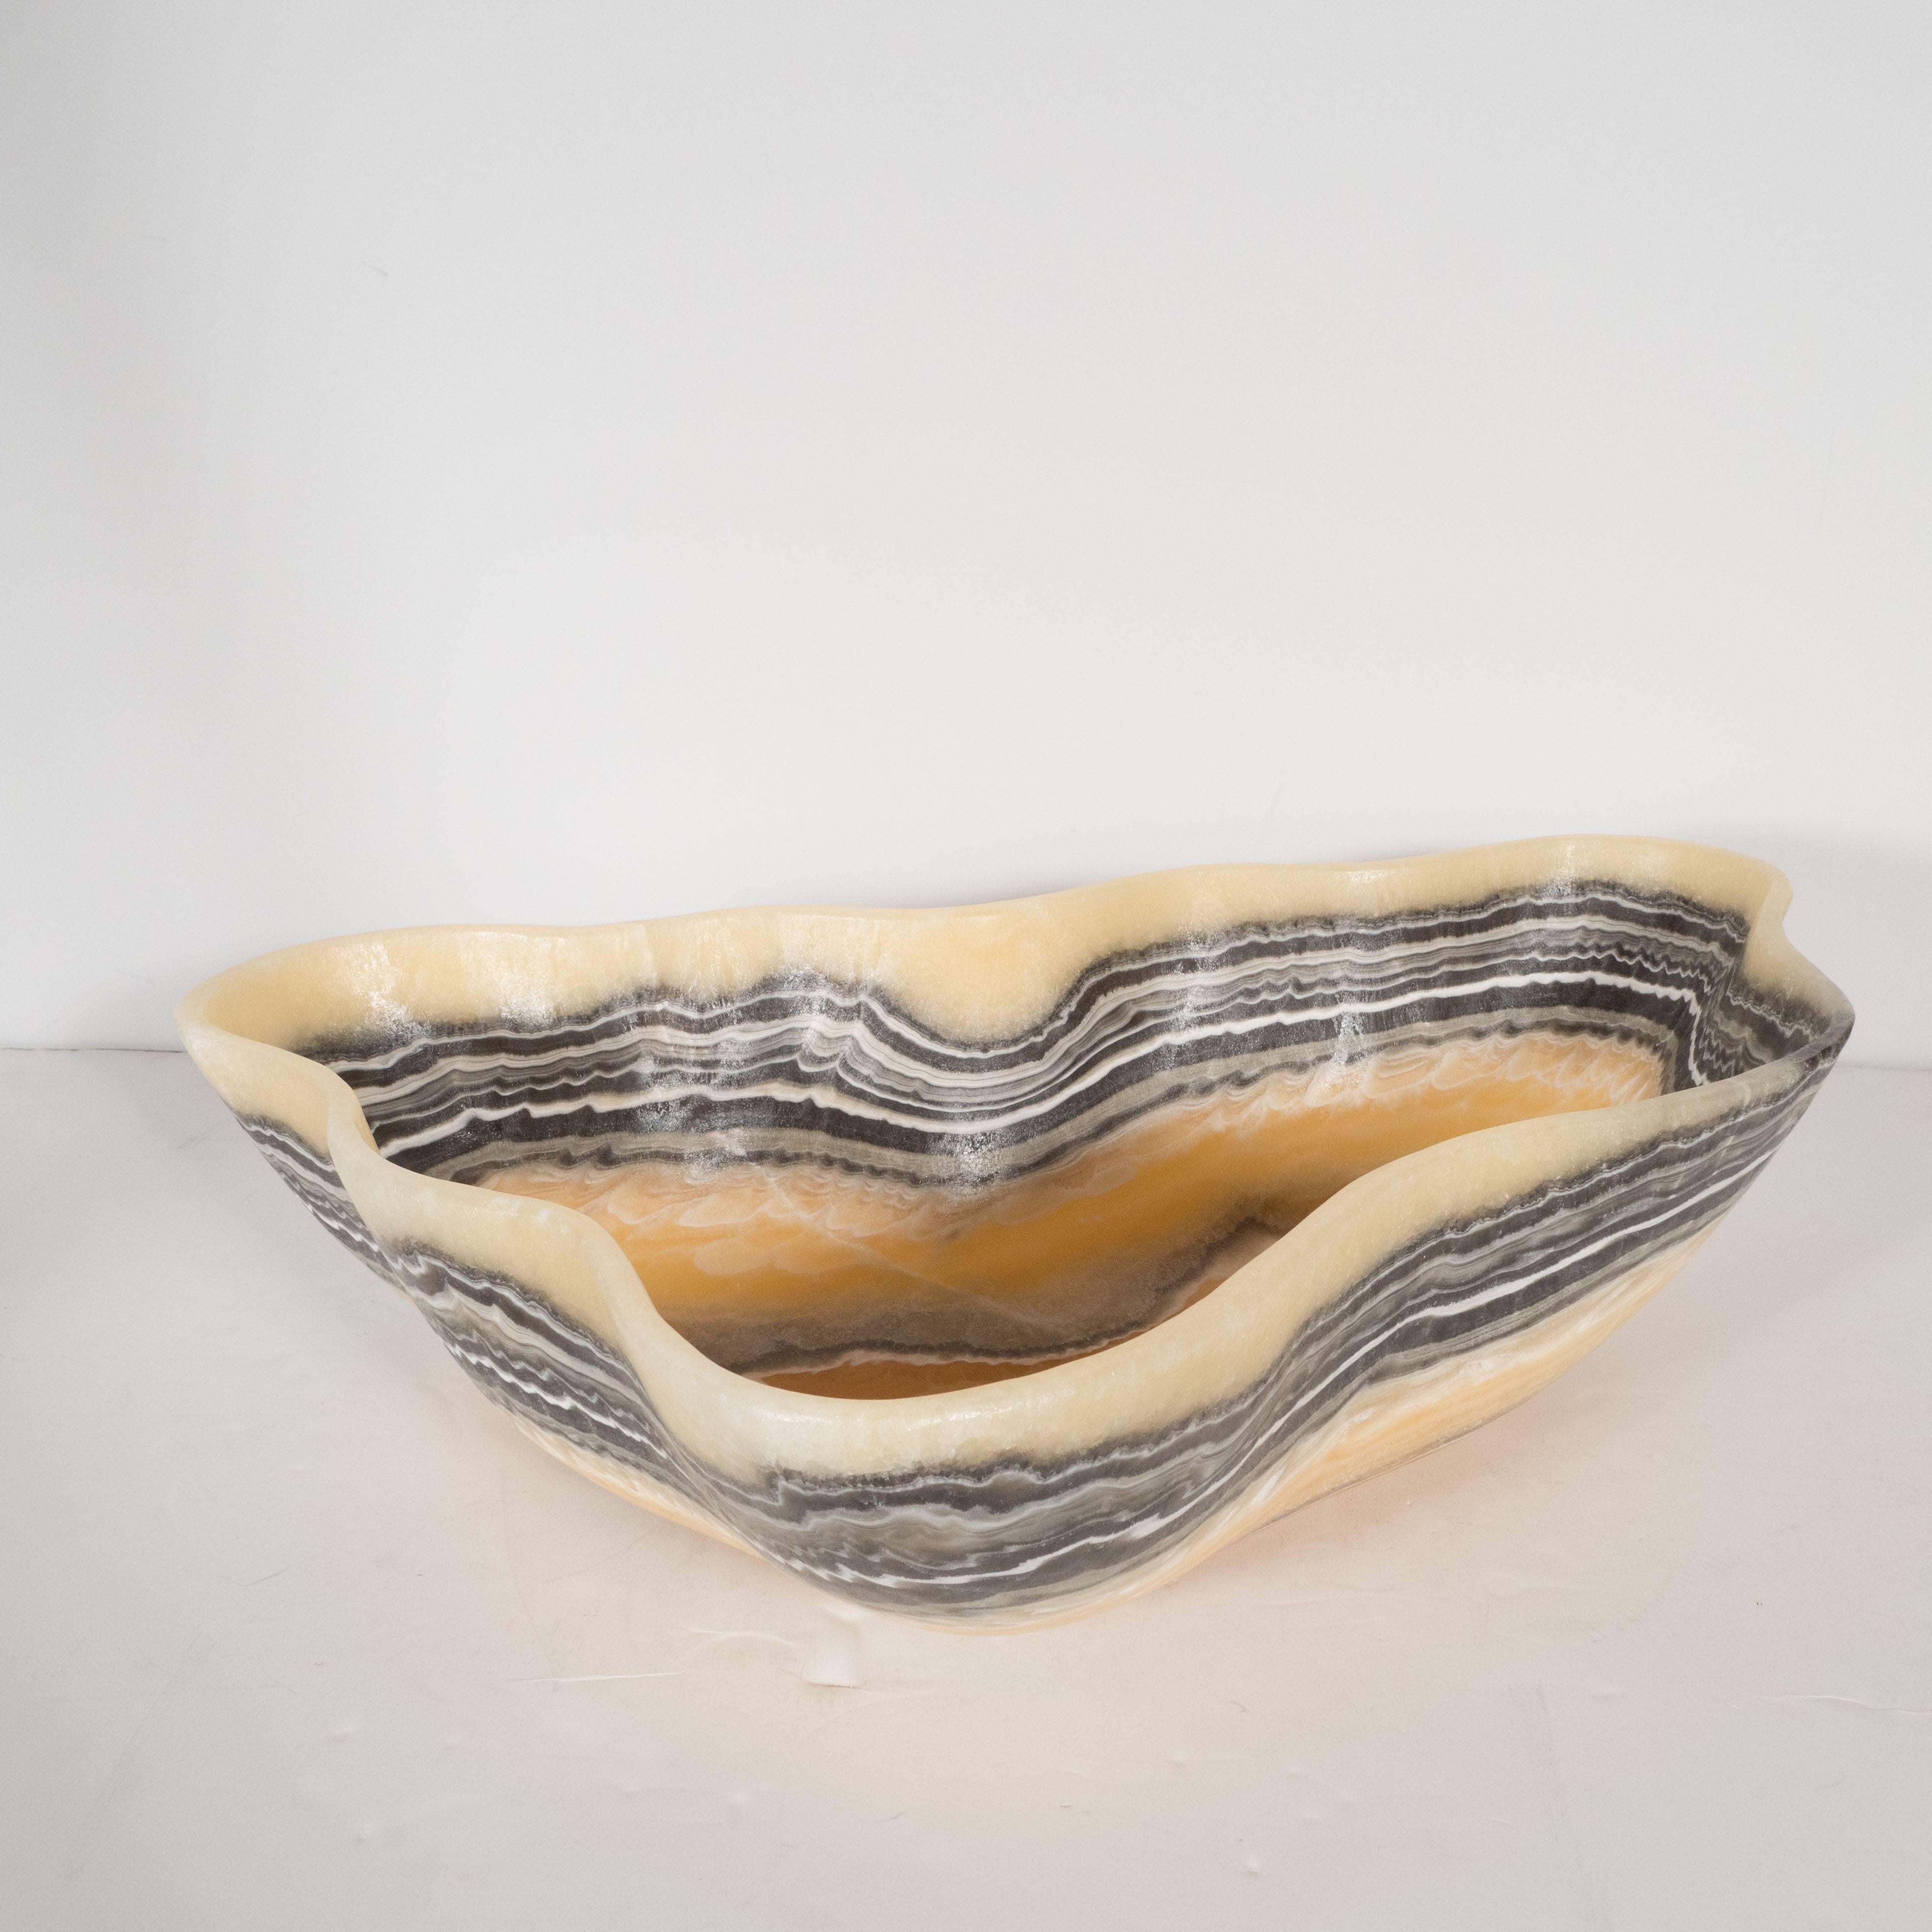 This compelling organic modern agate bowl features a wealth of texture in grisaille tones of charcoal, cream, and white set against a honey background, which adds a touch of warmth to the otherwise monochromatic palette. This piece showcases the